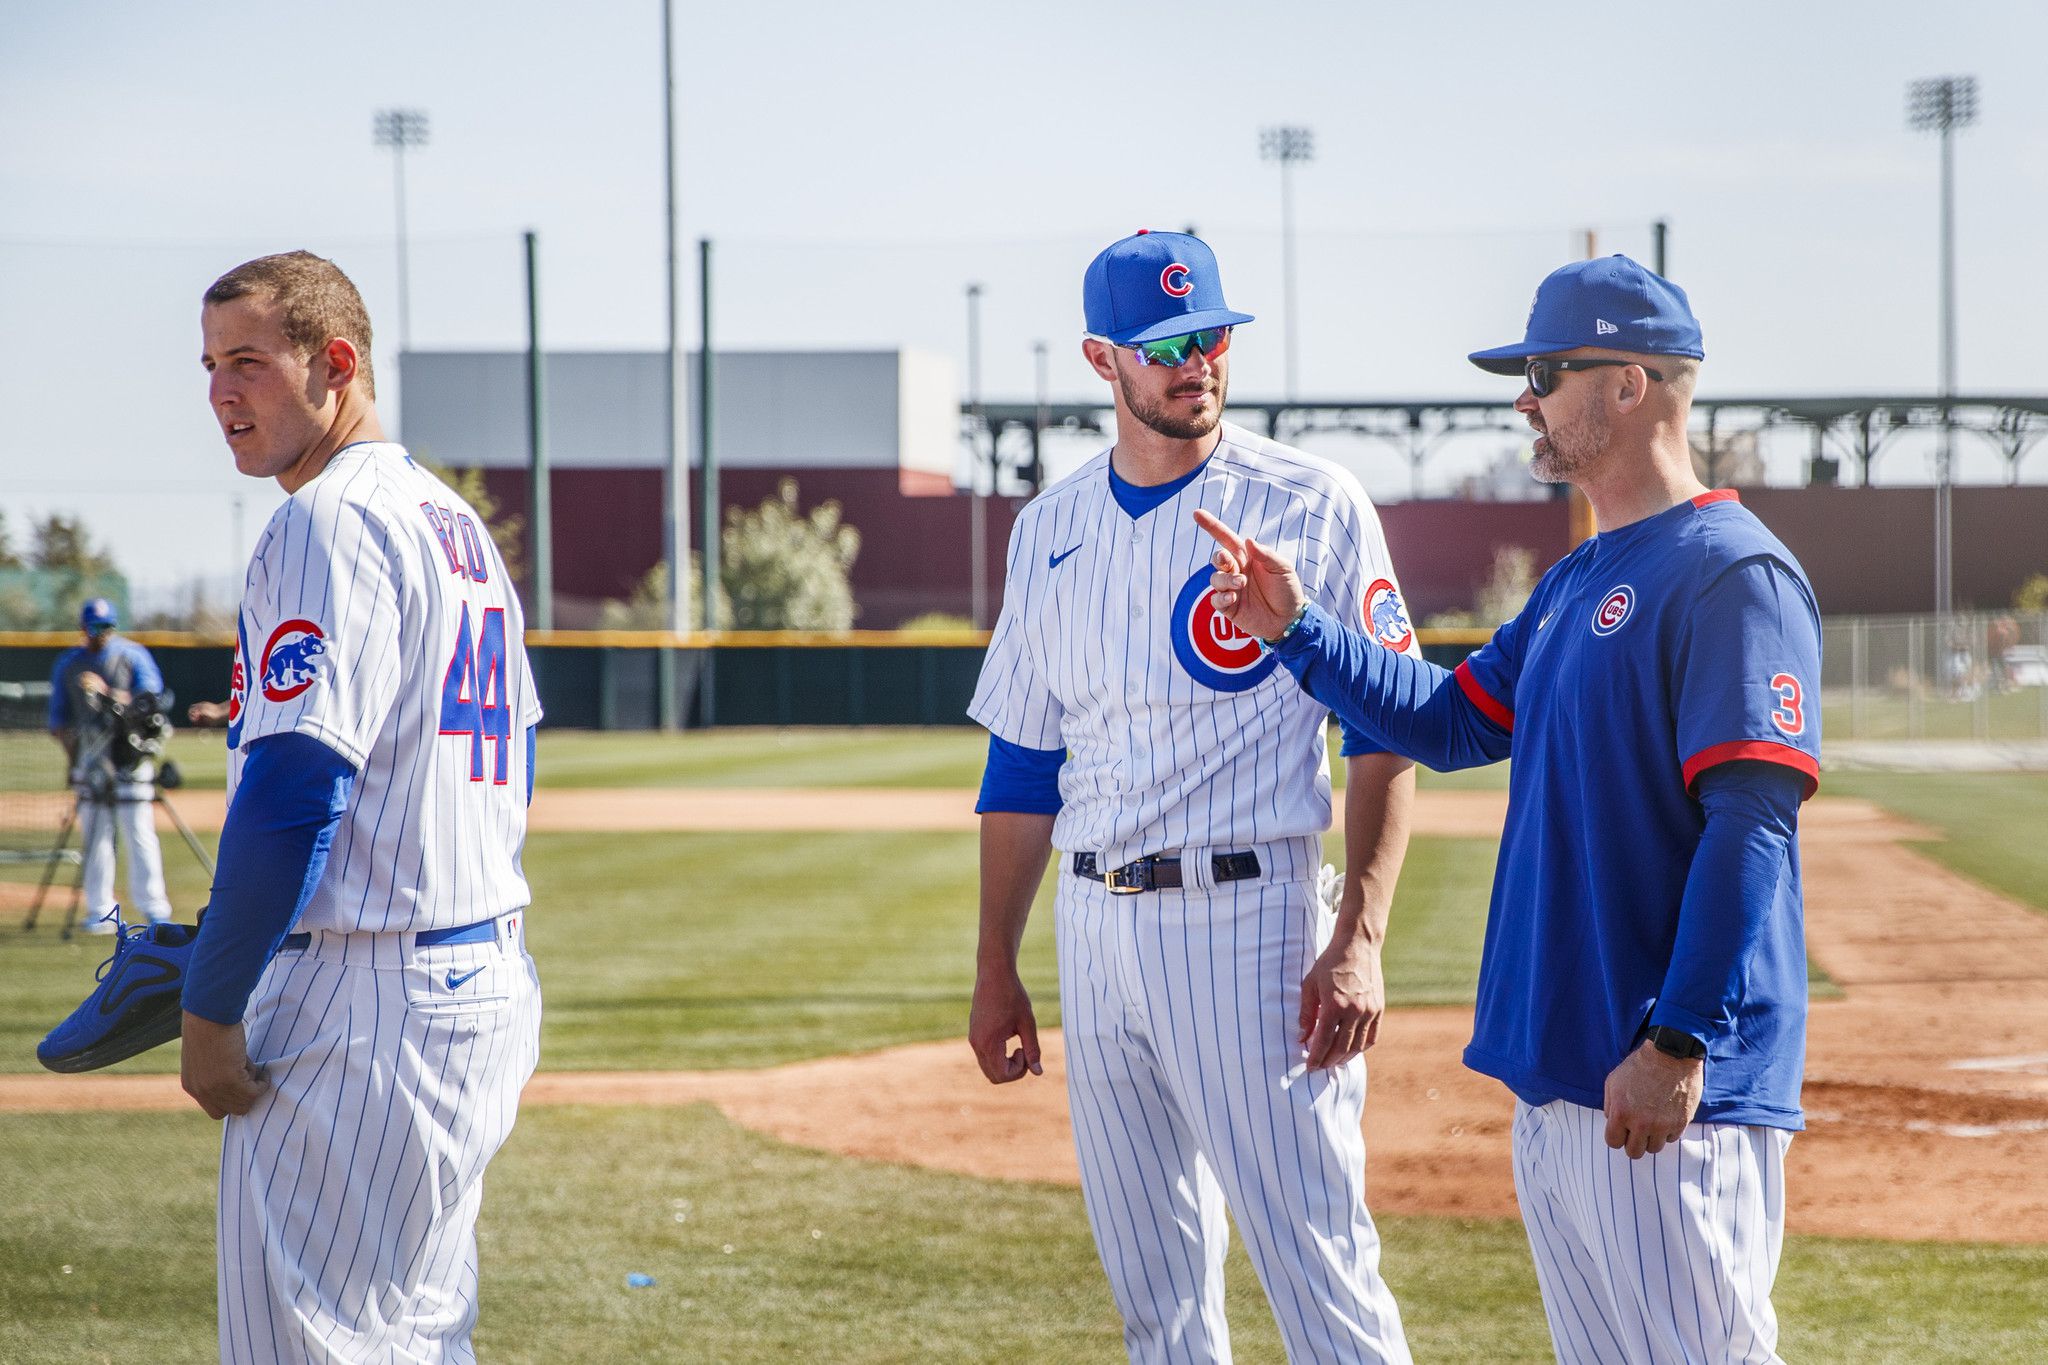 Cubs players at practice - Chicago Cubs 2020 Spring Training 